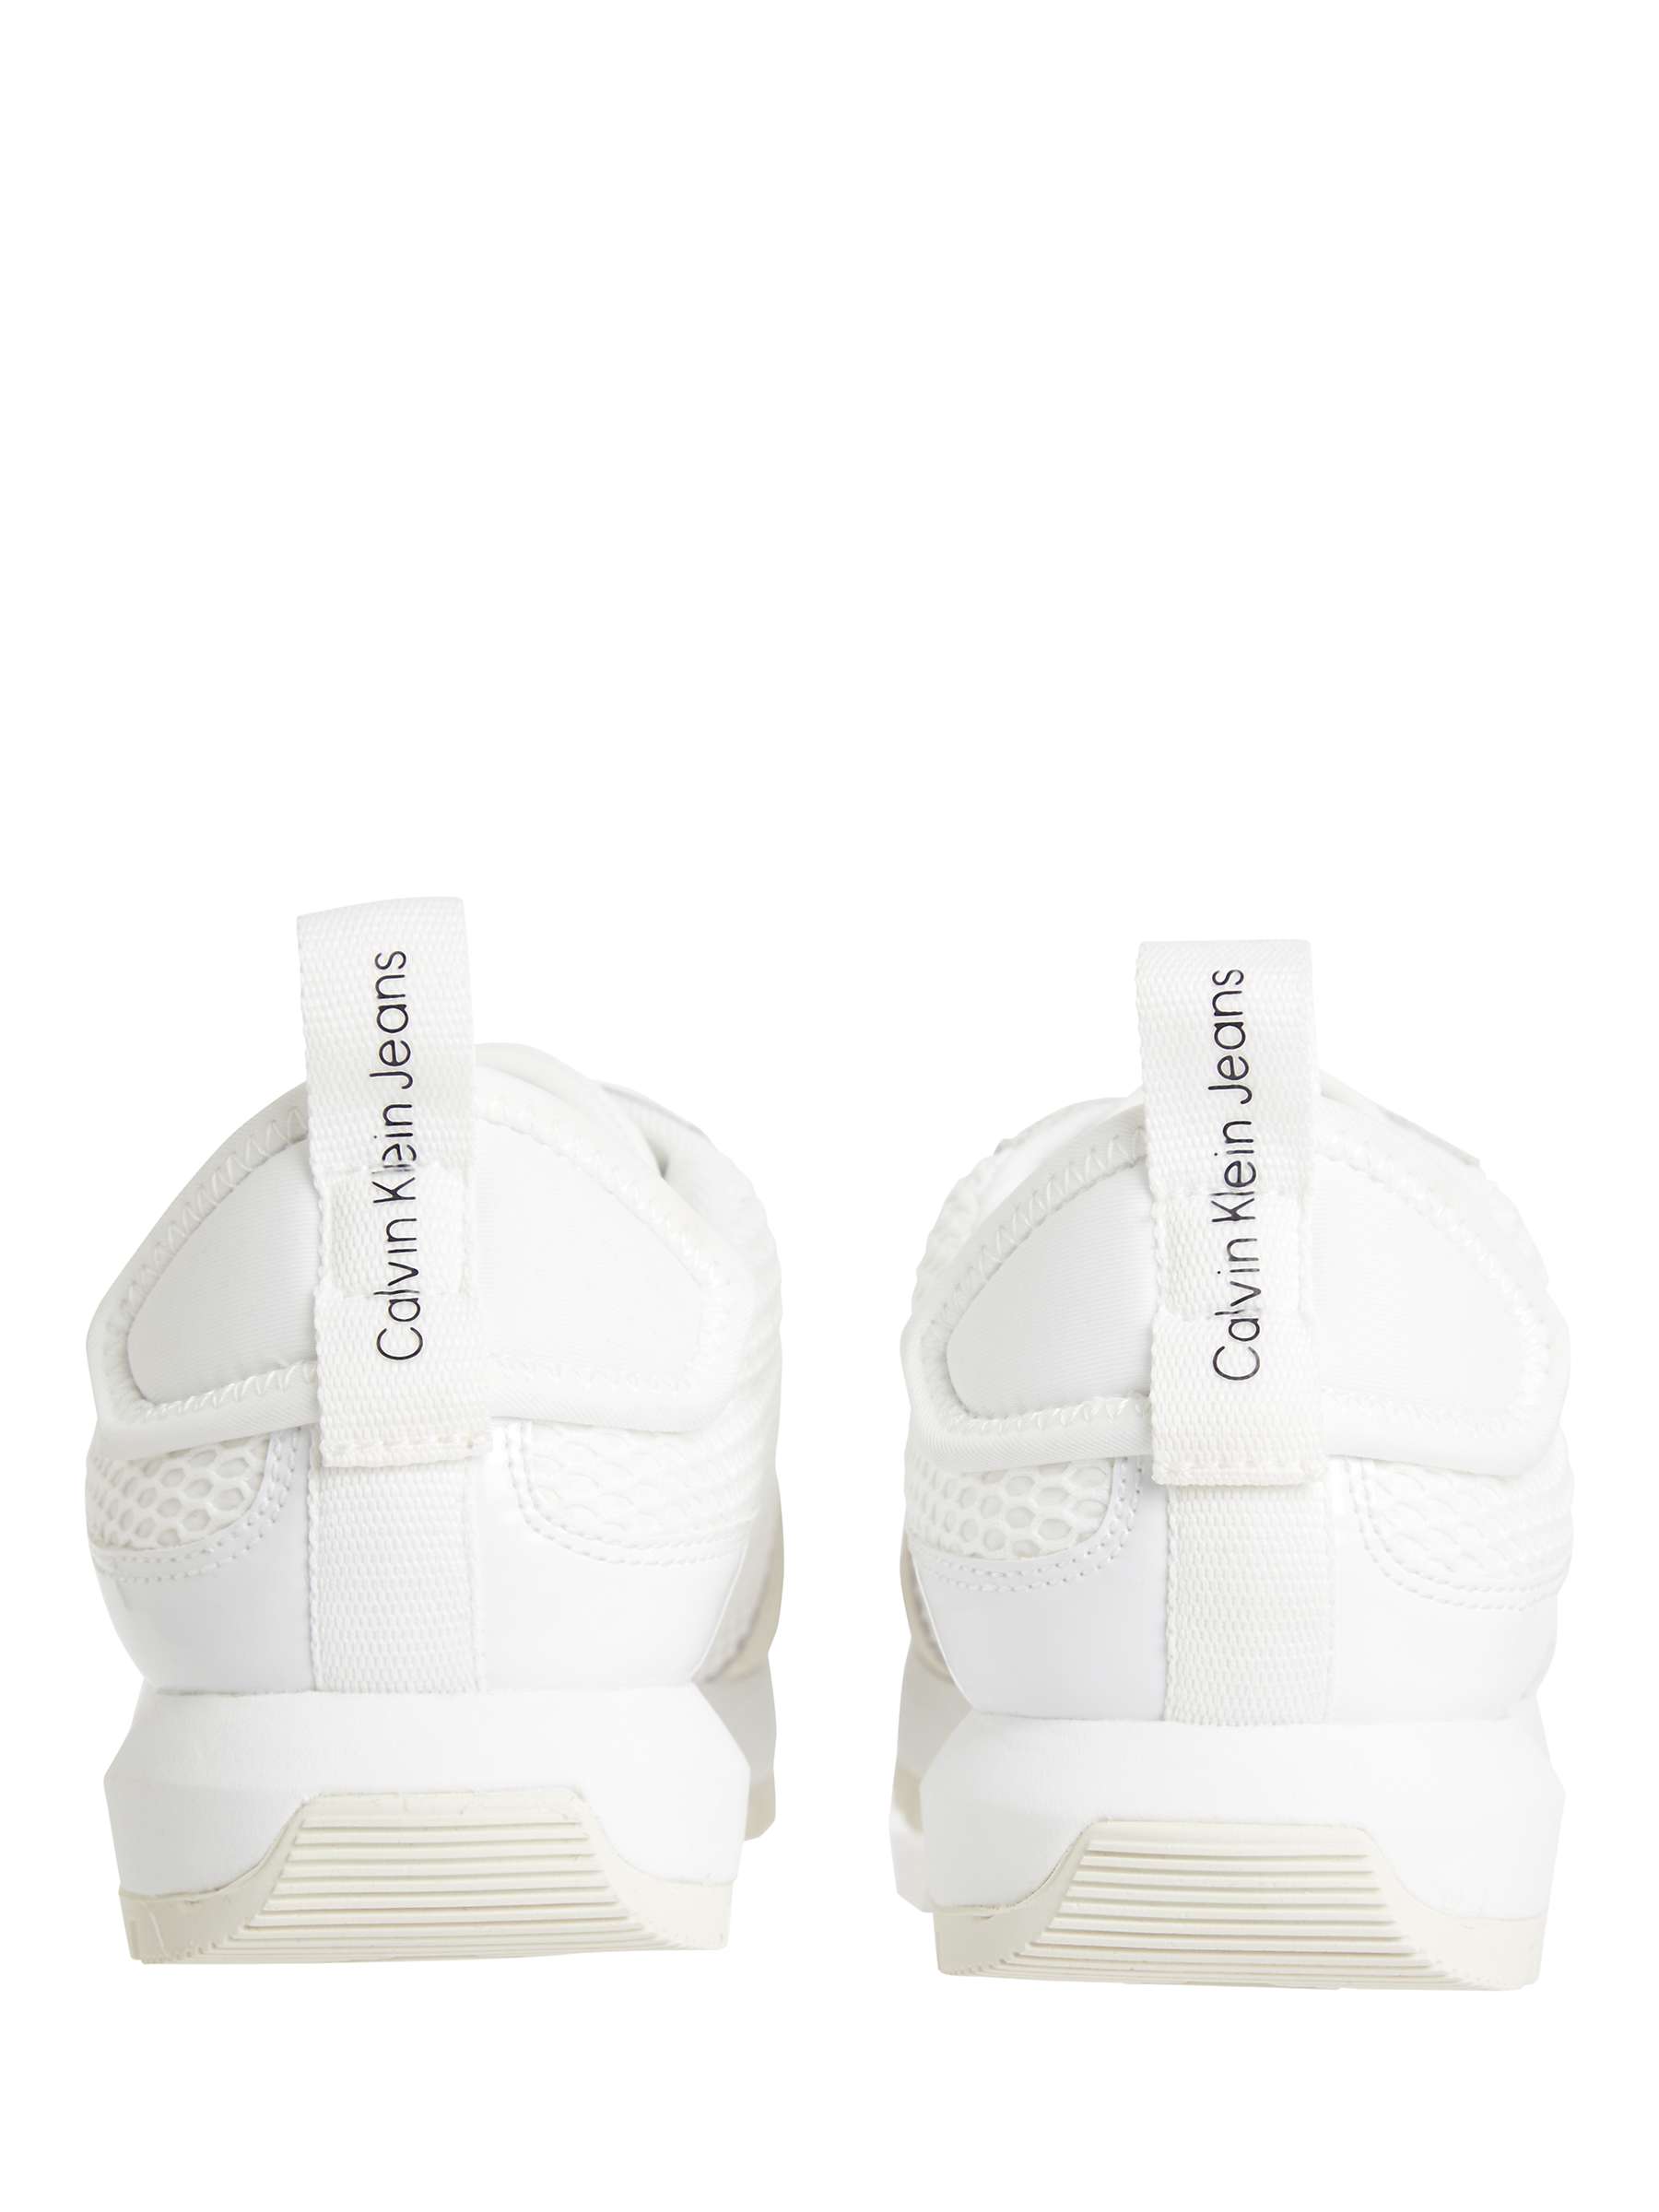 Buy Calvin Klein Recycled Lace Up Runner Trainers, White/Creamy White Online at johnlewis.com